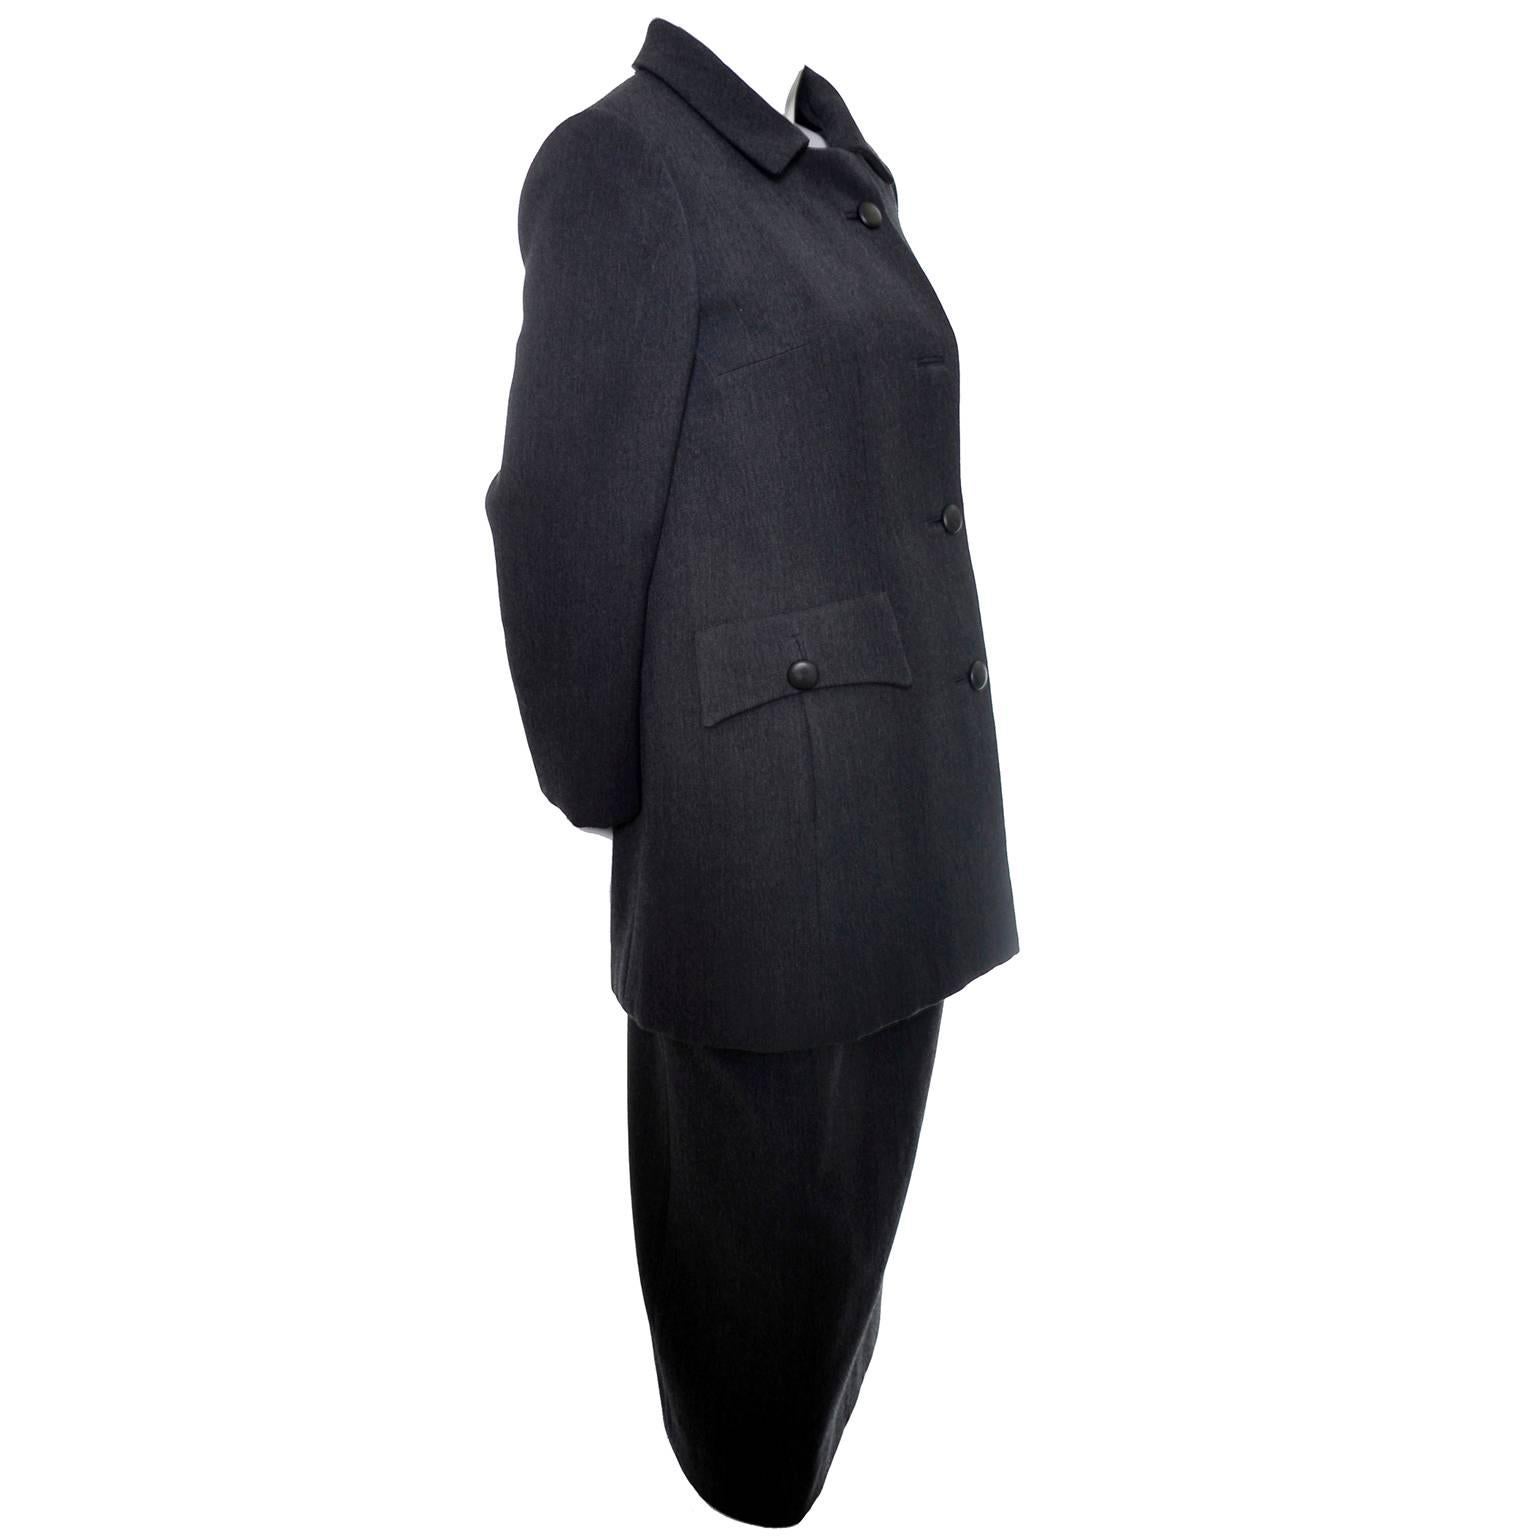 This is a vintage structured wool suit from the early 1960's designed by Harry Shacter for Ben Zuckerman of New York.  The suit is made of dark gray wool and lined in silk.  The skirt has a side zipper and the jacket has front buttons and pockets. 